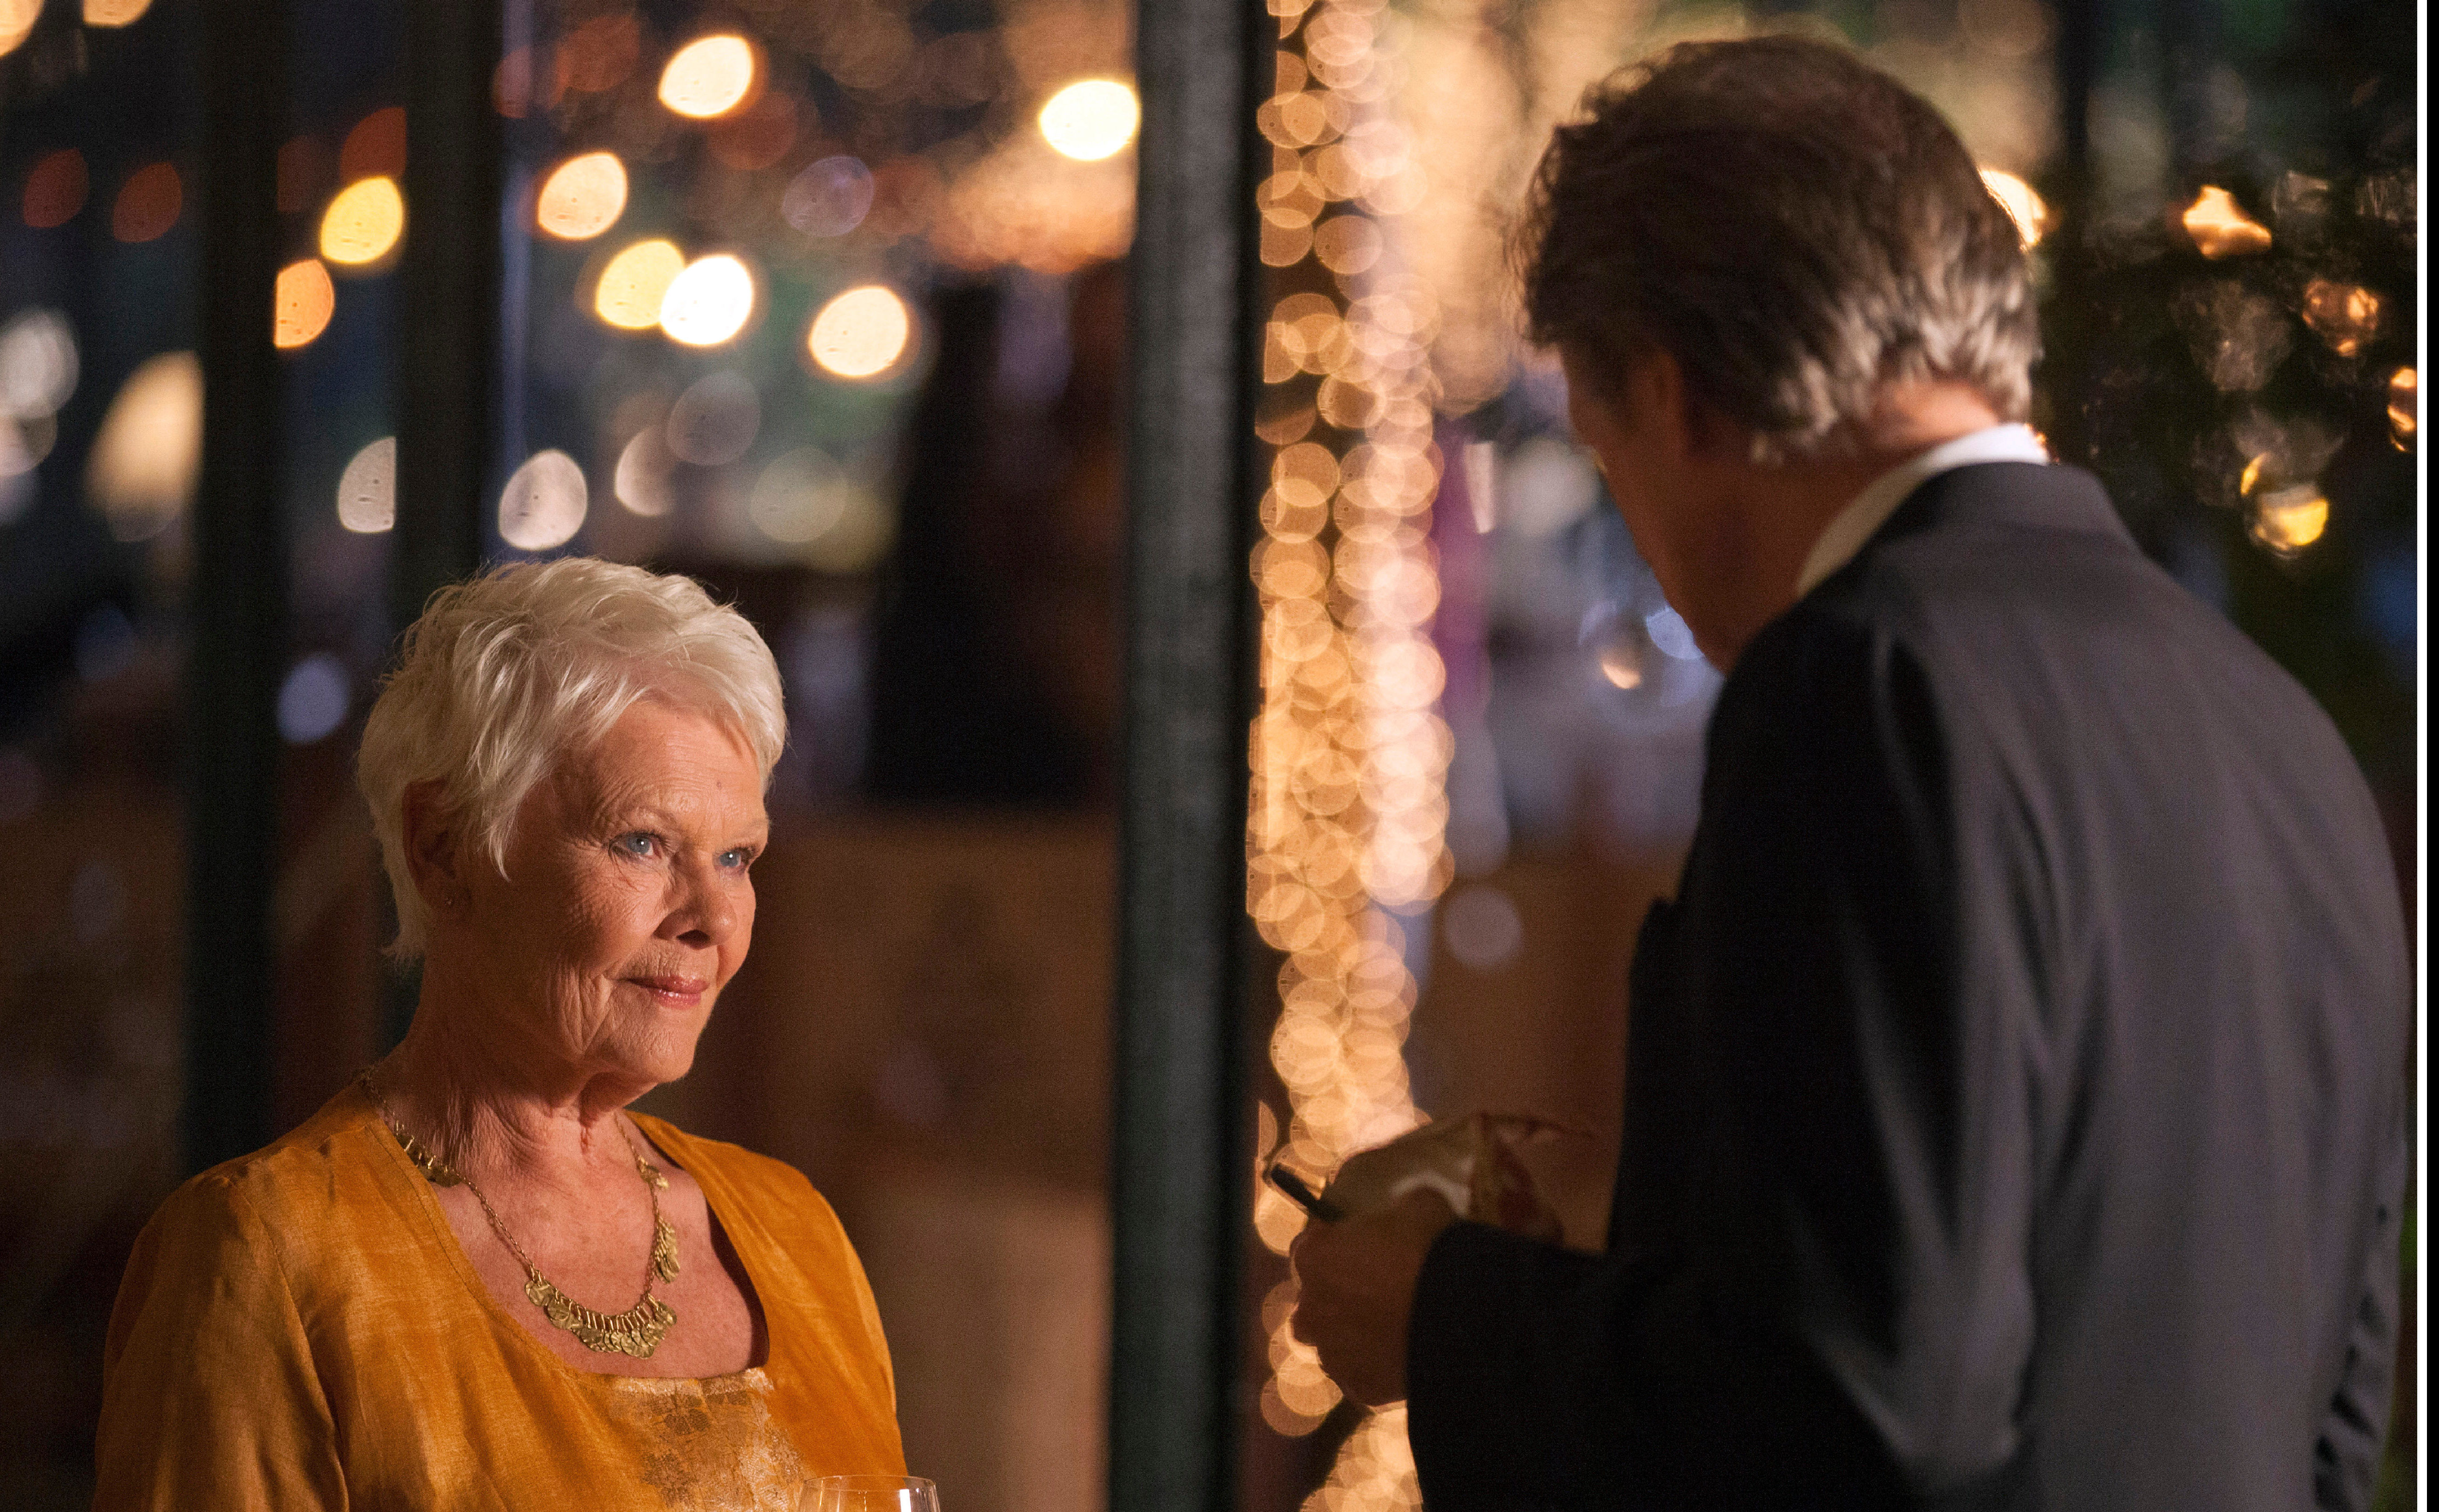 Finding love again in The Best Exotic Marigold Hotel.